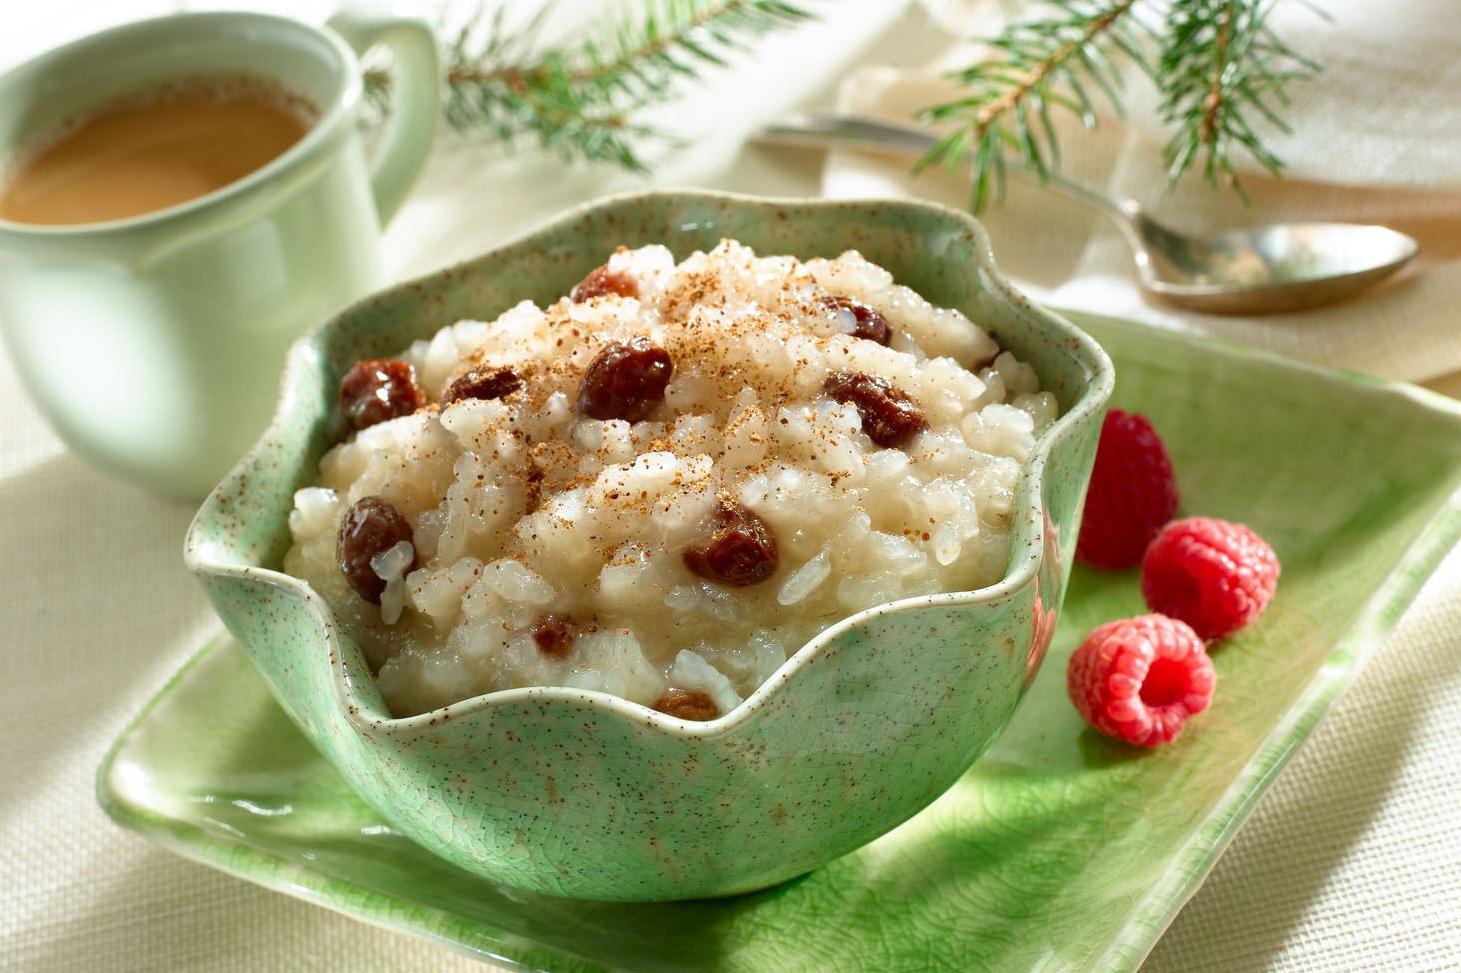  Indulge in a bowl of warm and comforting arroz con dulce on a chilly evening.